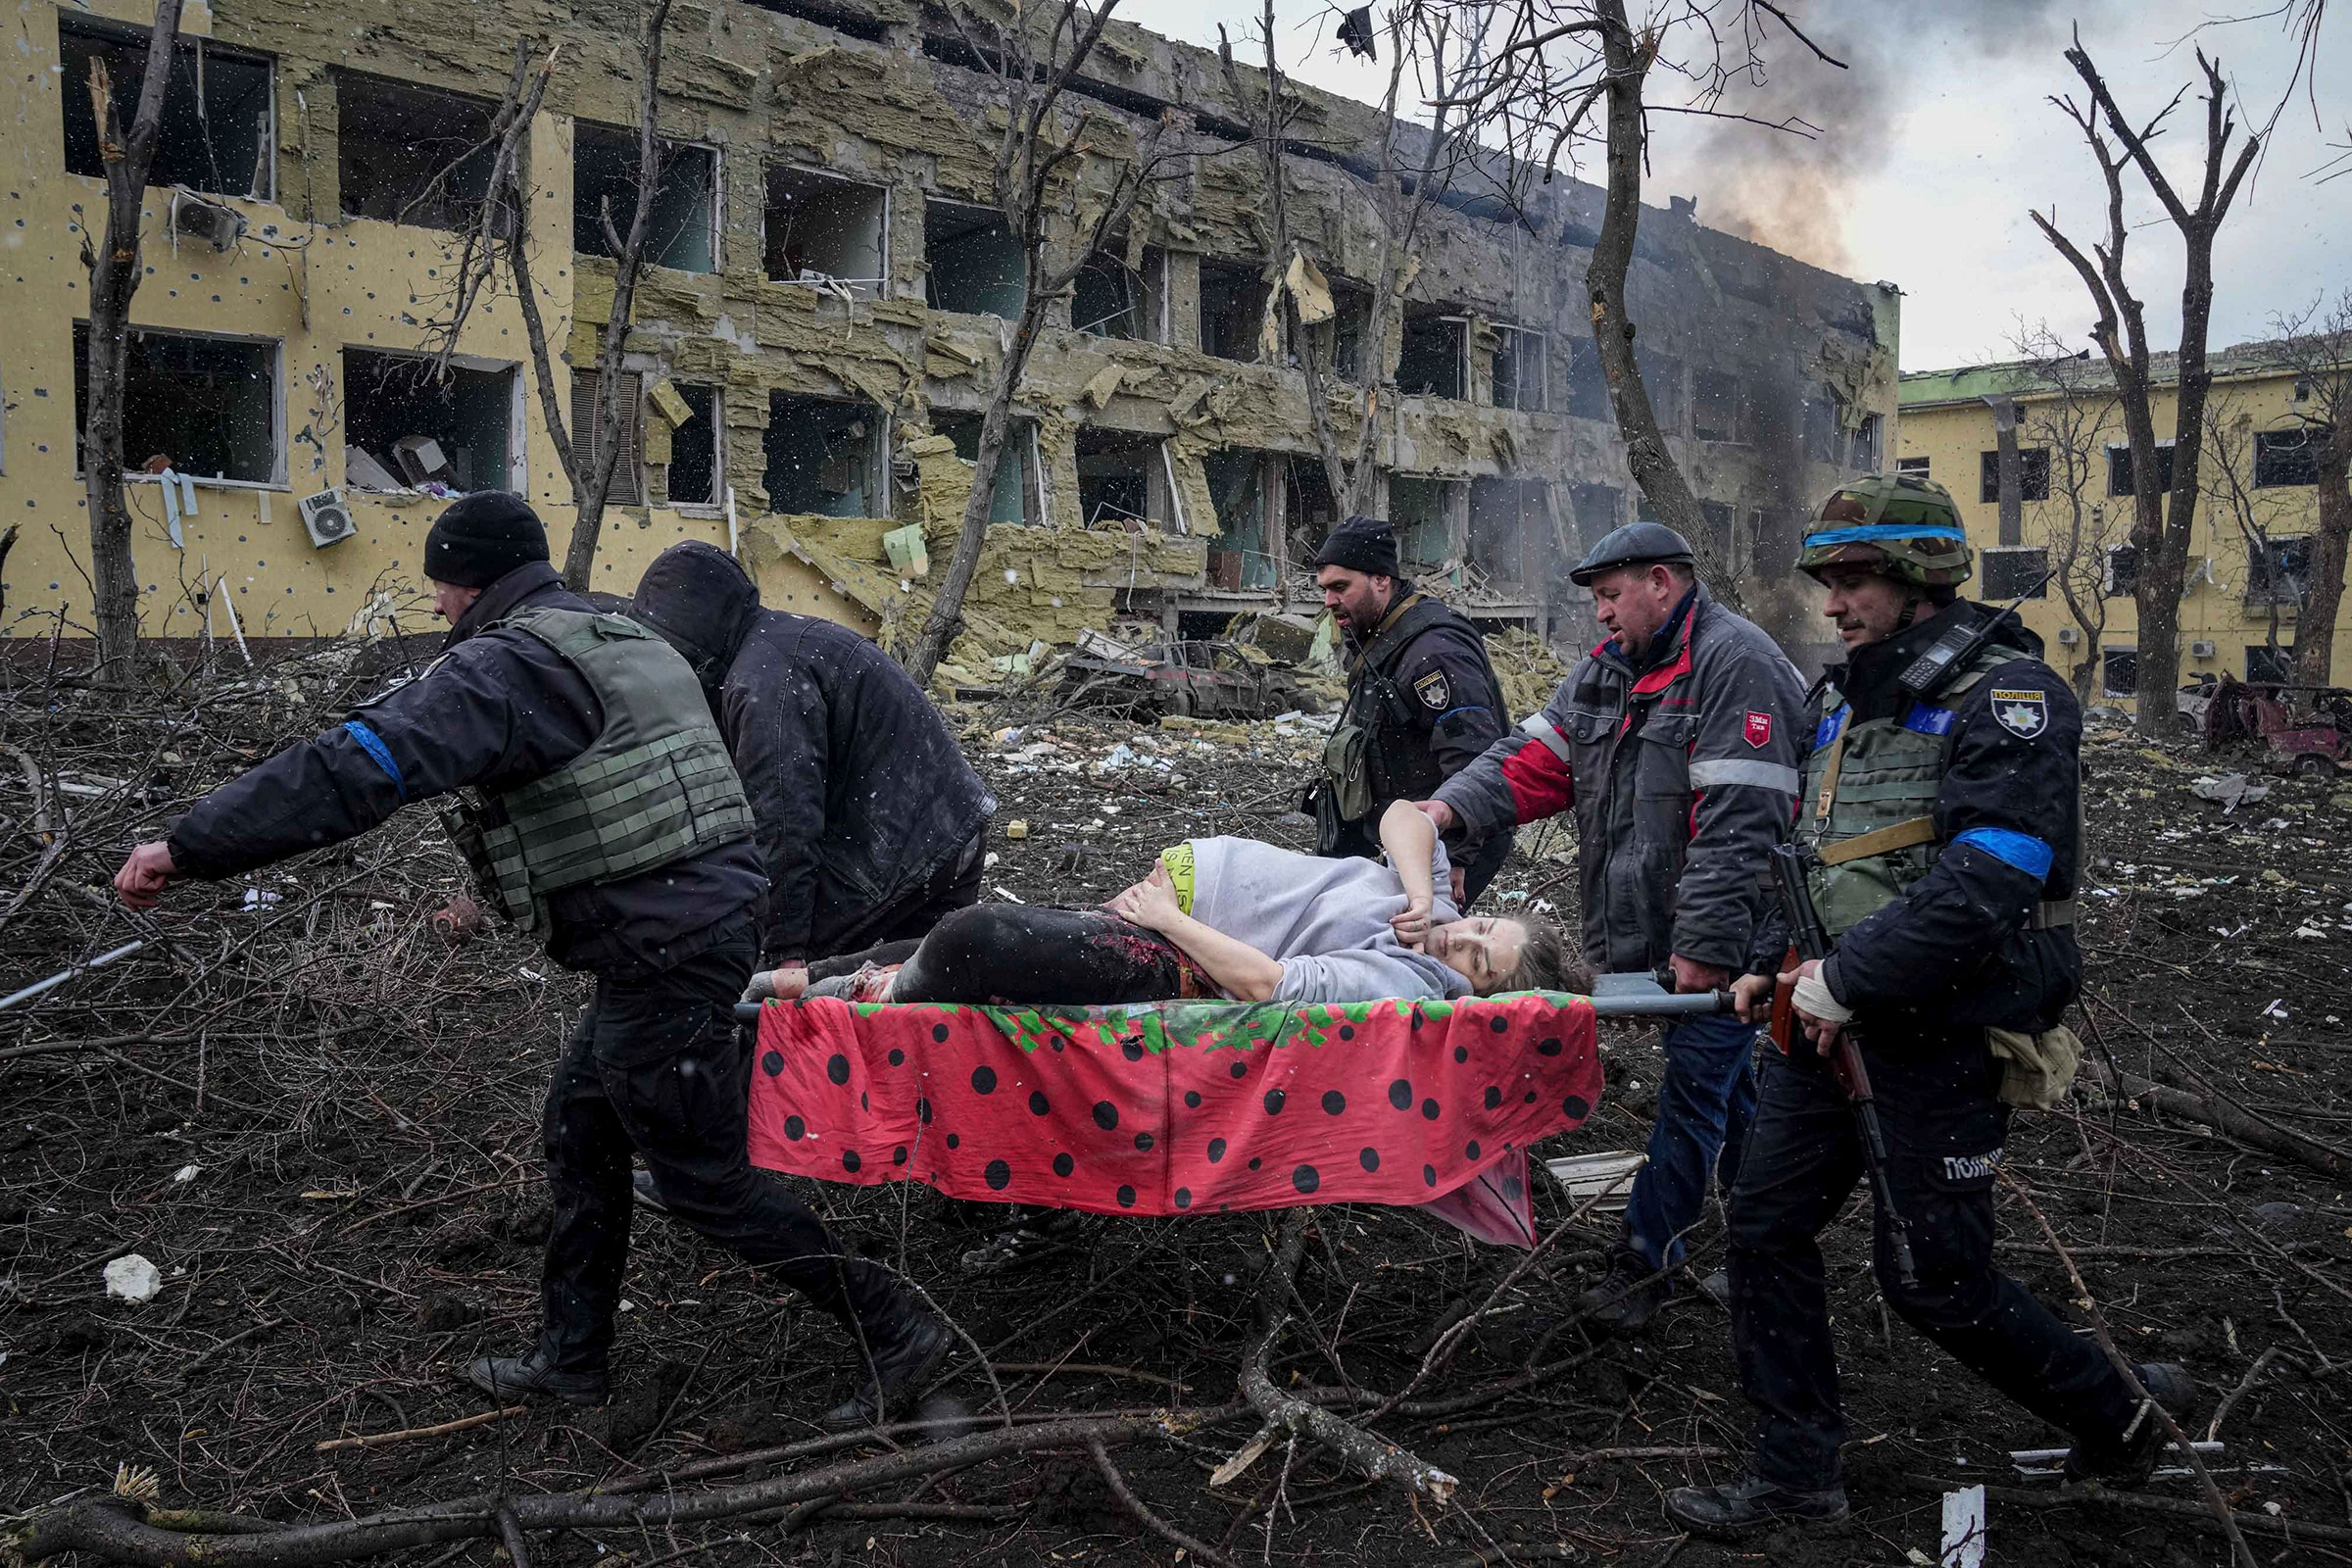 Ukrainian emergency employees and volunteers carry an injured pregnant woman from a maternity hospital damaged by shelling in Mariupol, Ukraine, on March 9. The baby was born dead. Half an hour later, the mother died too. (Evgeniy Maloletka—AP)